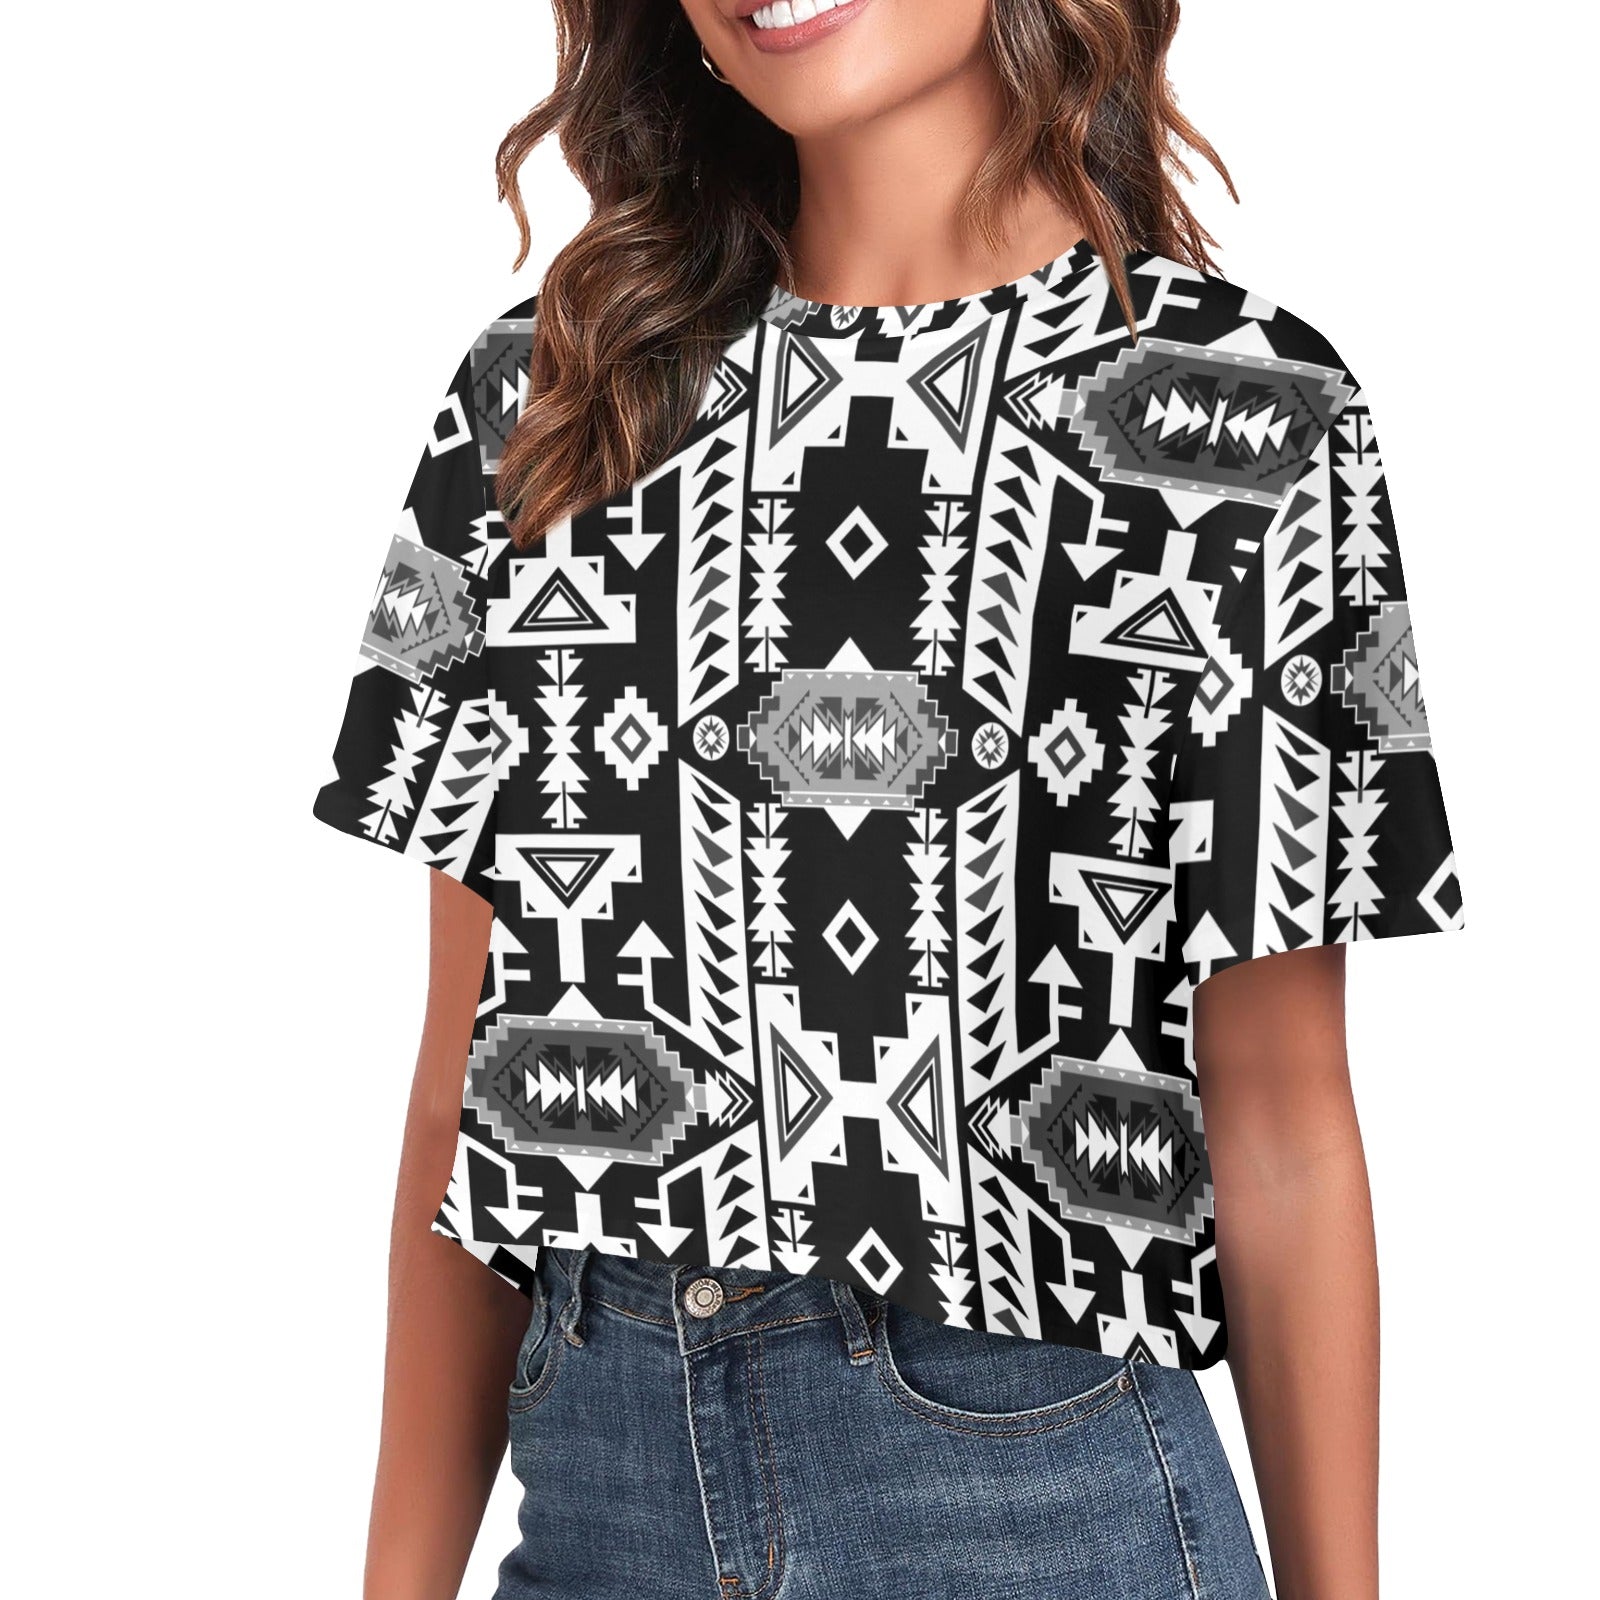 Chiefs Mountain Black and White Women's Cropped T-shirt